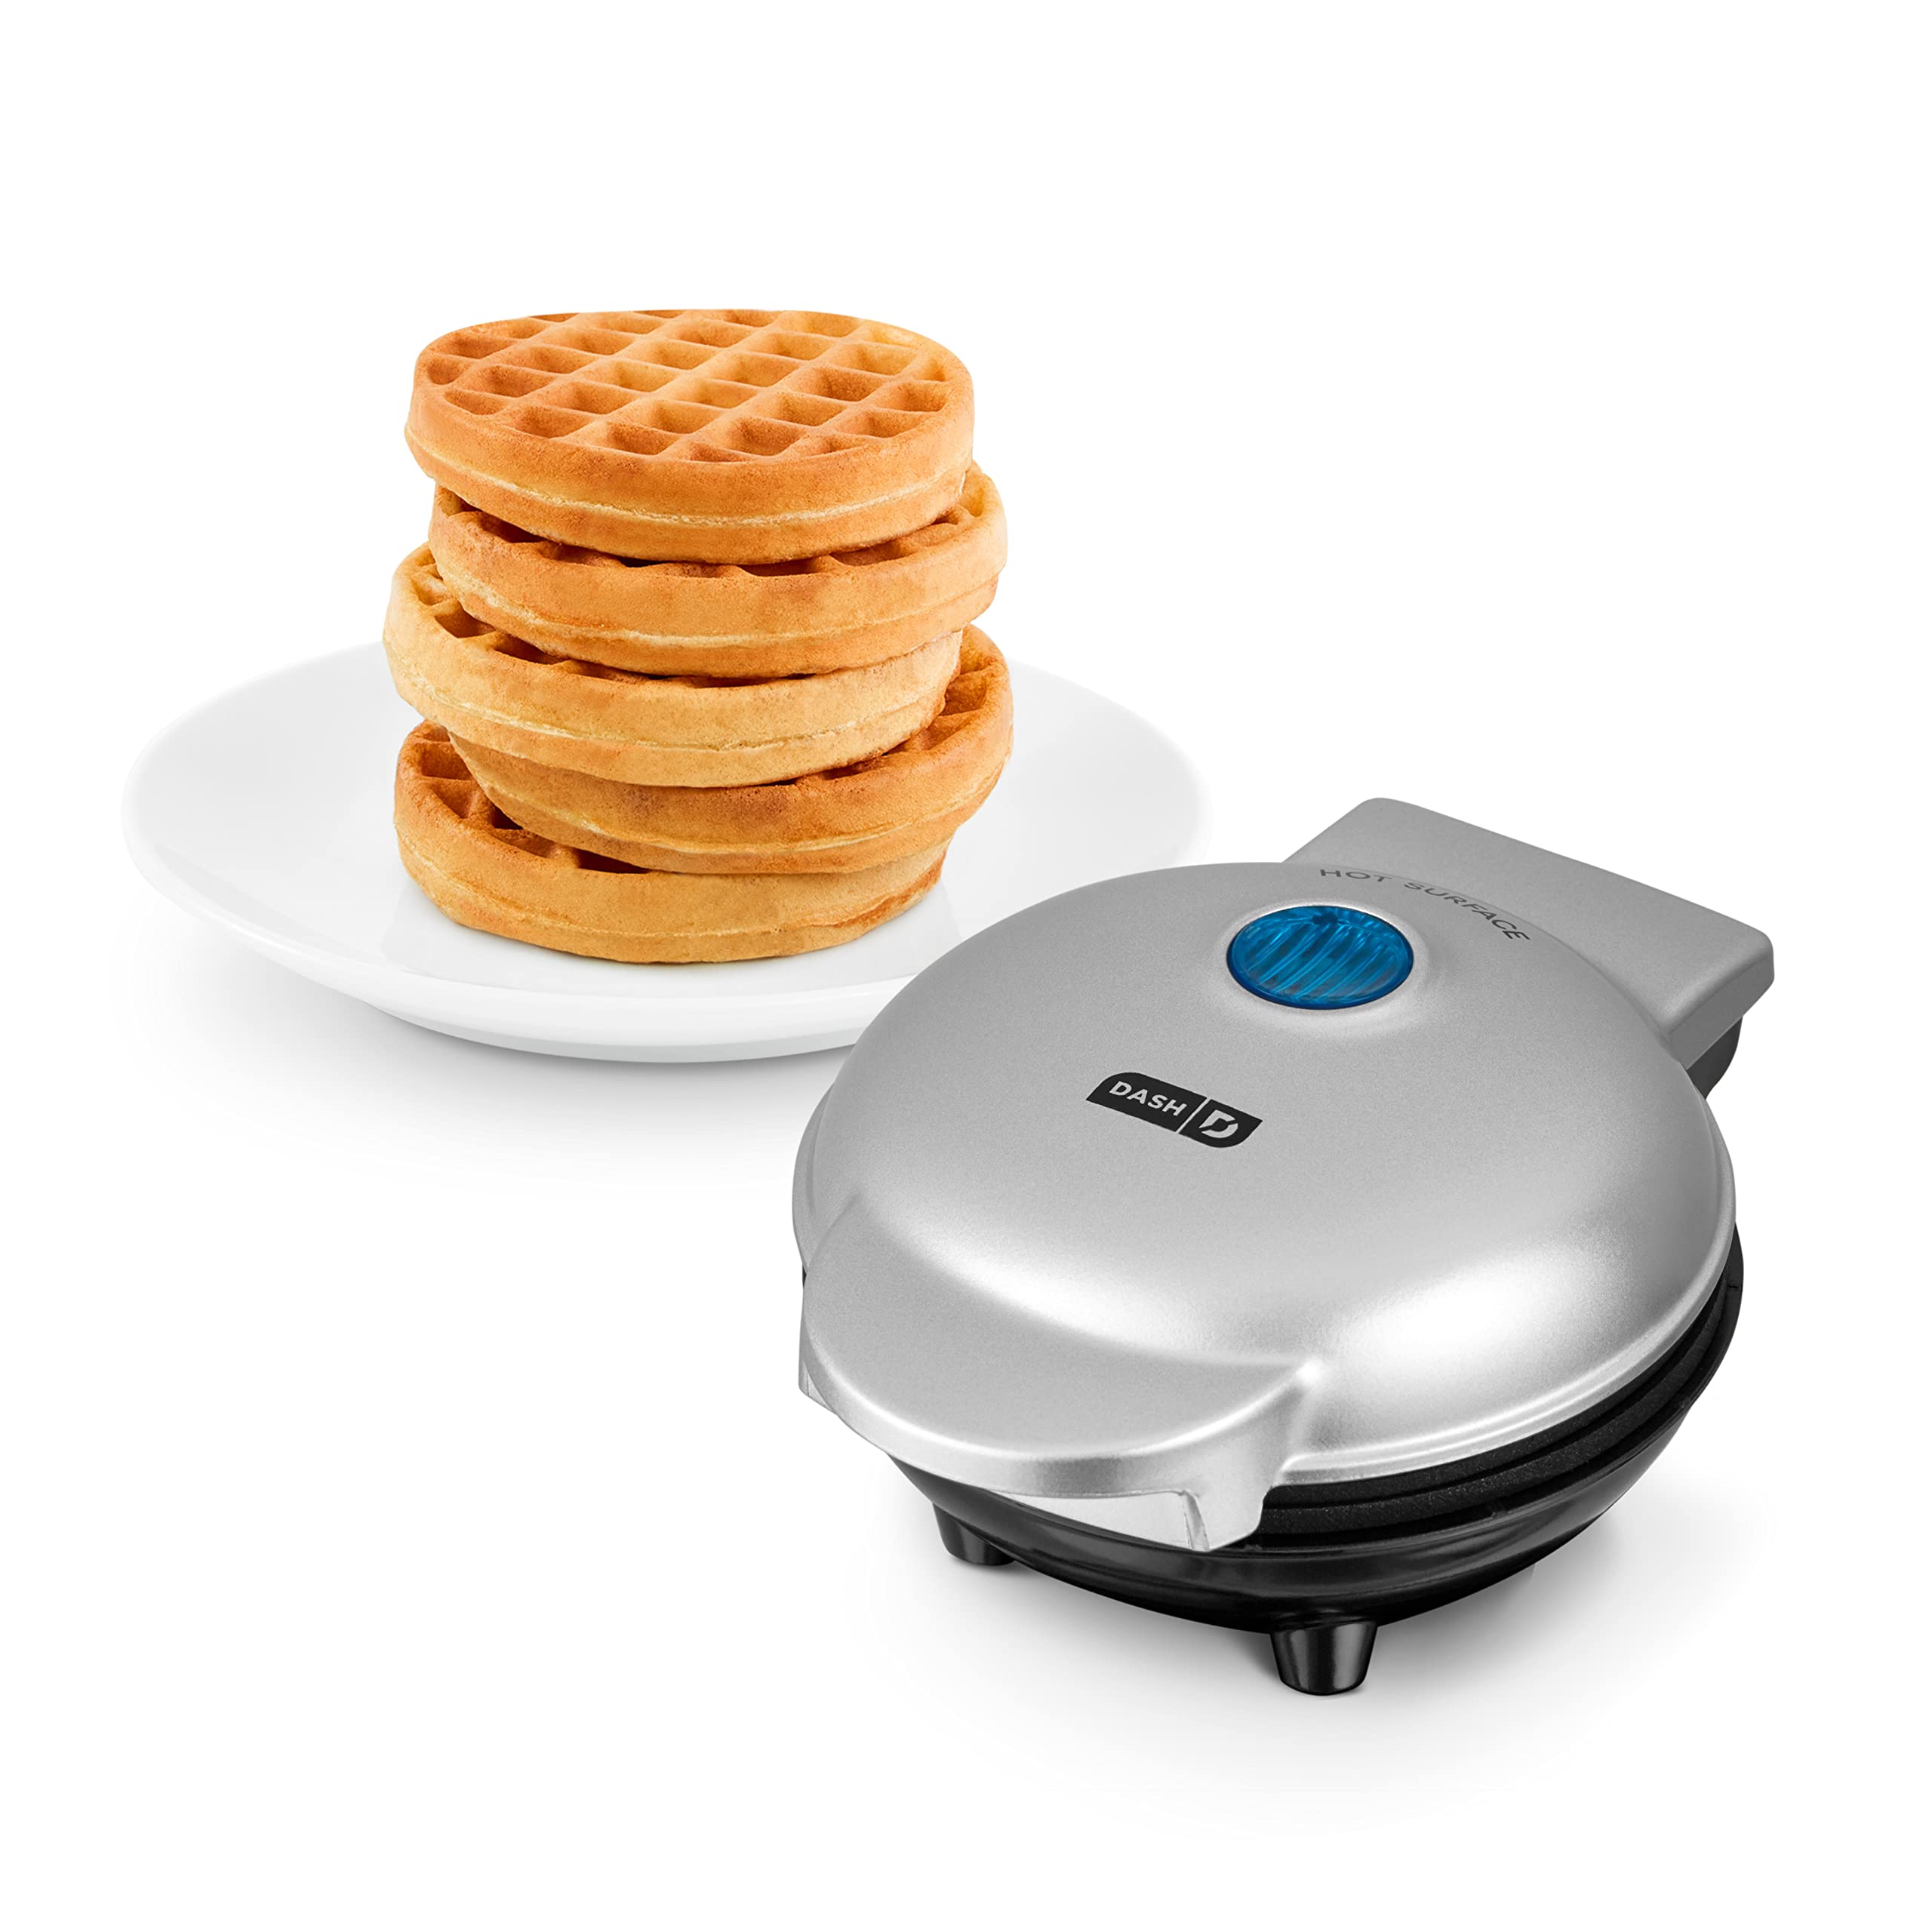 DASH DMW001SL Mini Maker for Individual Waffles, Hash Browns, Keto Chaffles with Easy to Clean, Non-Stick Surfaces, 4 Inch, Silver